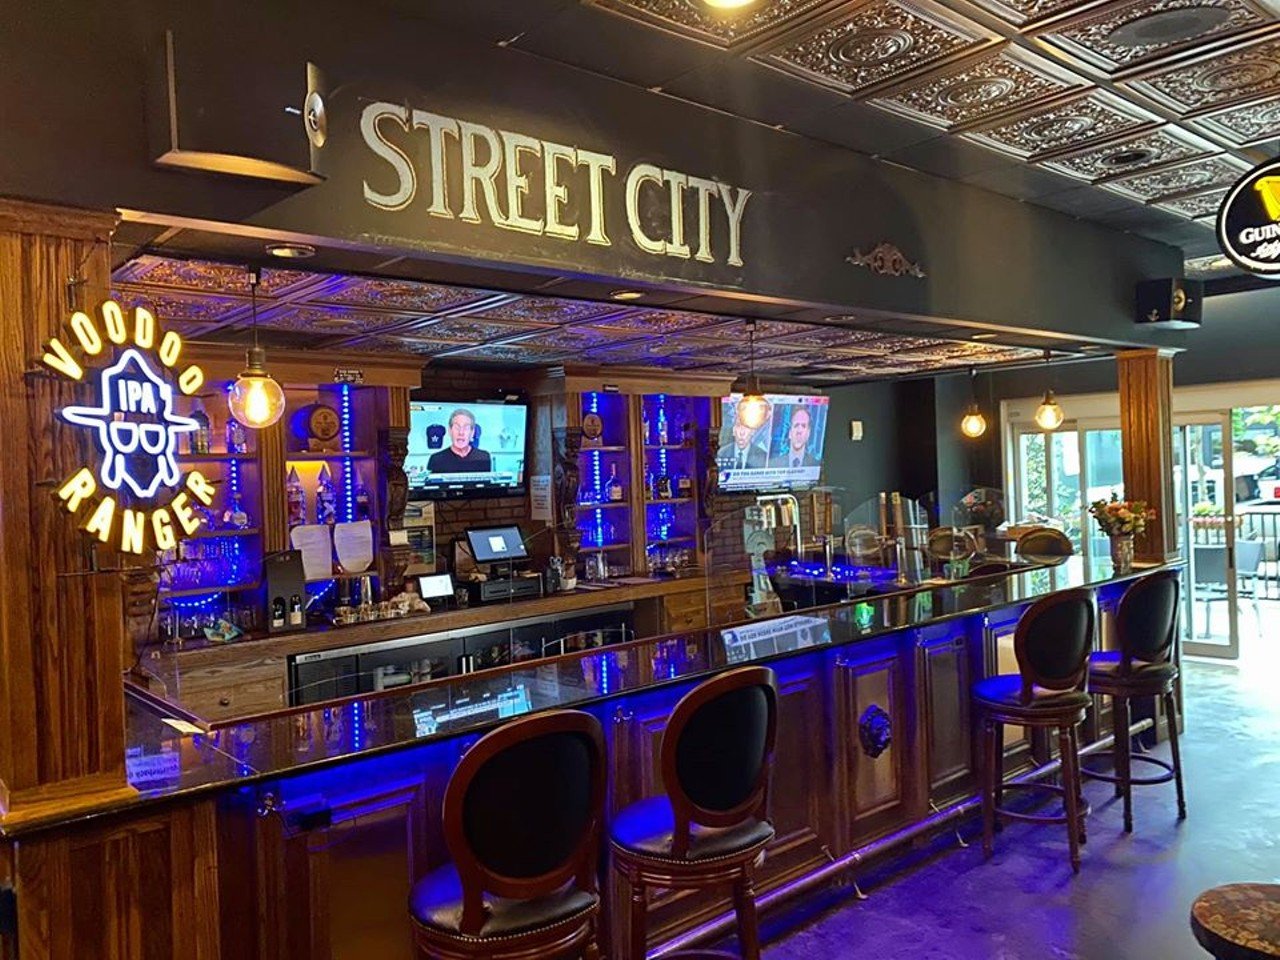 Street City Pub580 Walnut St., Downtown
Specializing in an urban gourmet menu, this traditional Irish pub offers a relaxed vibe and broad selection of craft beer. Try Fretboard-beer-battered cod.